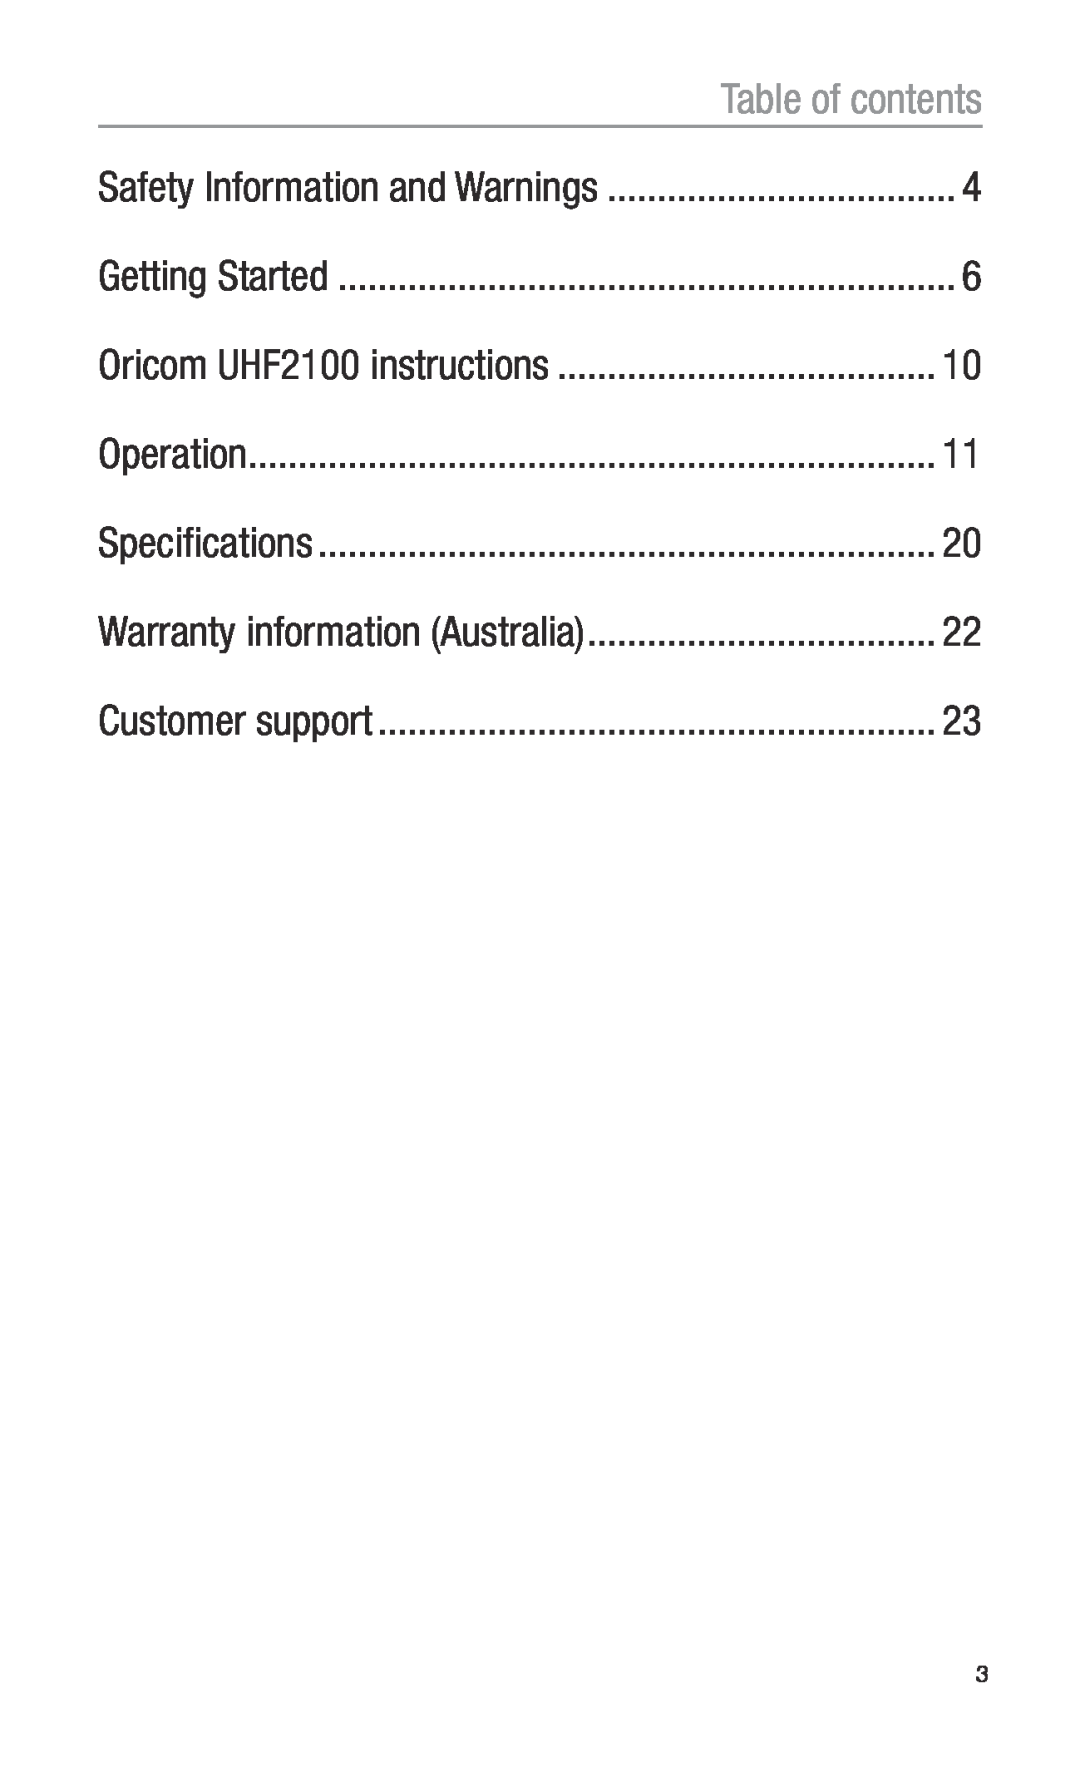 Oricom Table of contents, Getting Started, Oricom UHF2100 instructions, Operation, Specifications, Customer support 